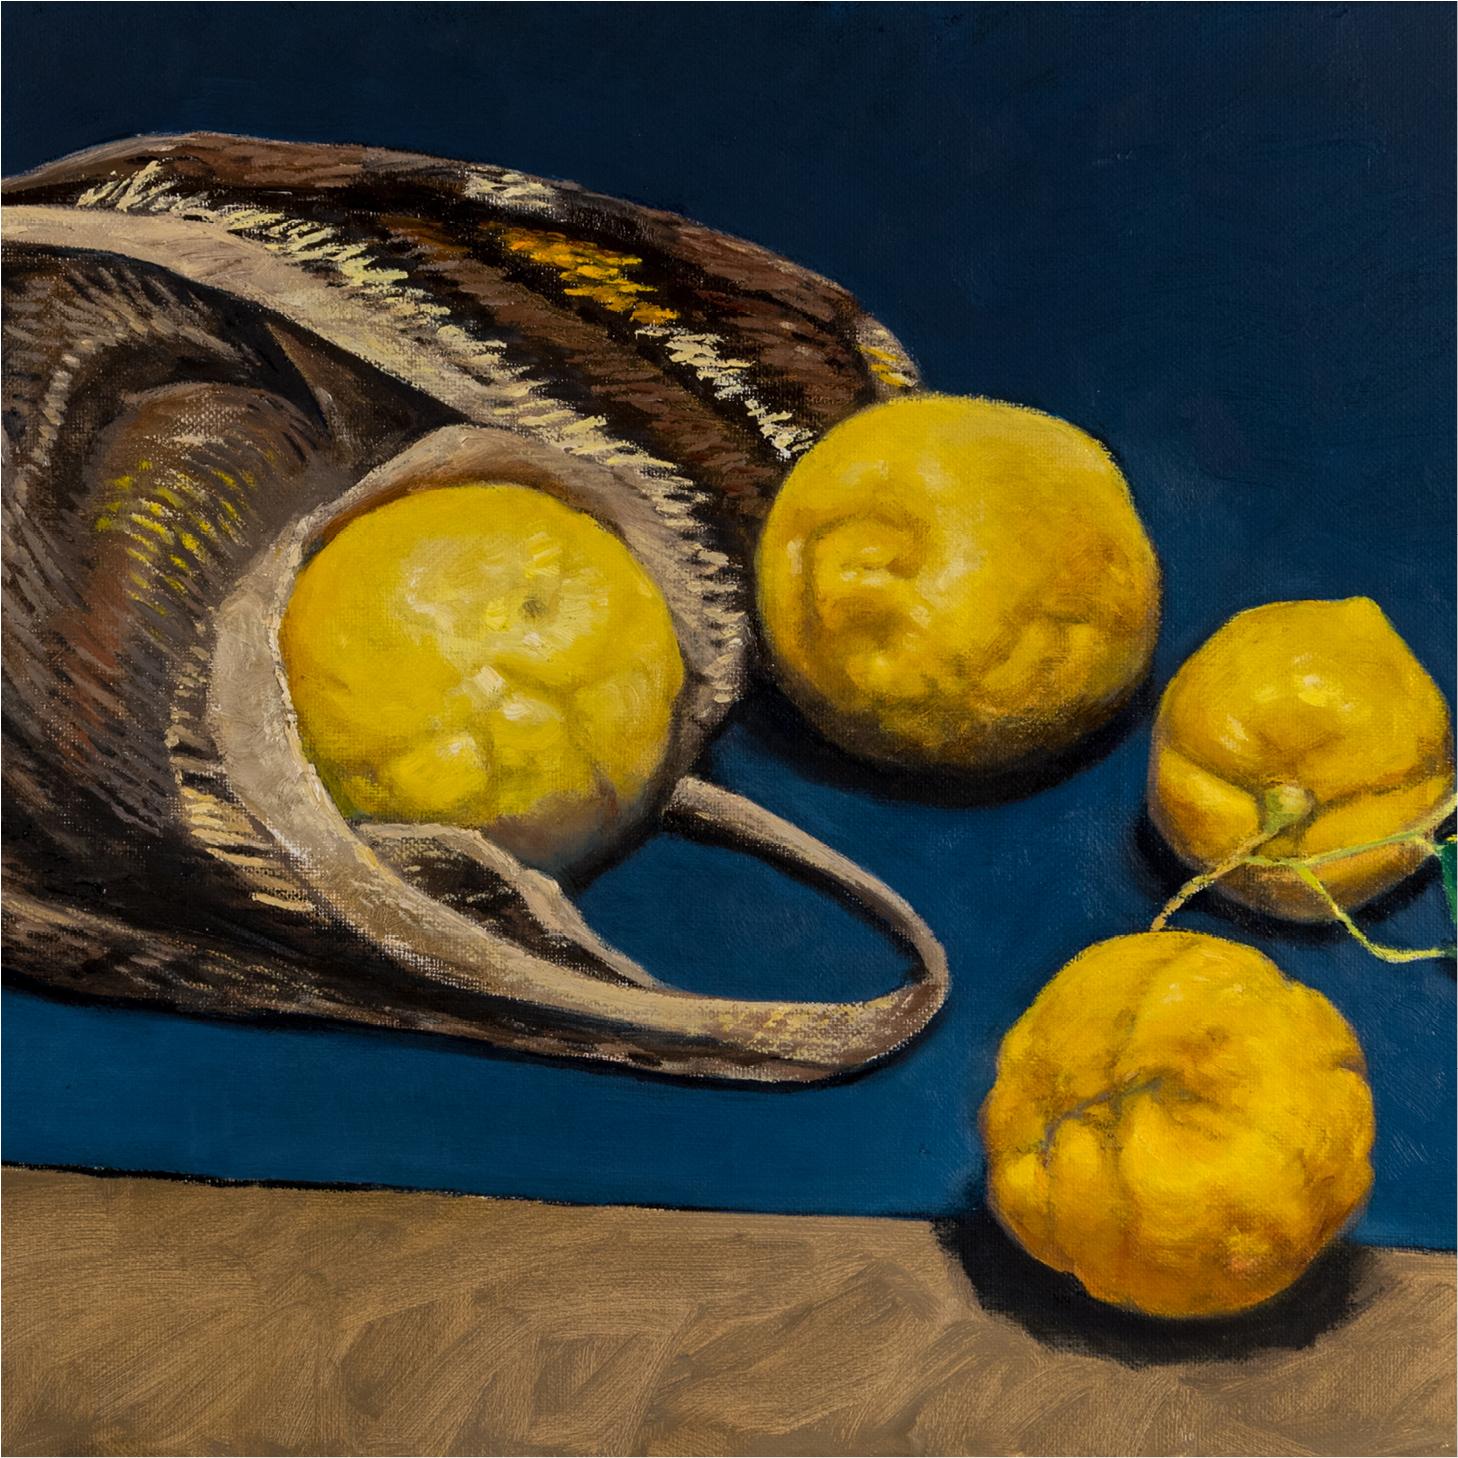 Unlemon – a meandering tale of citrus by Alison Mitchell  